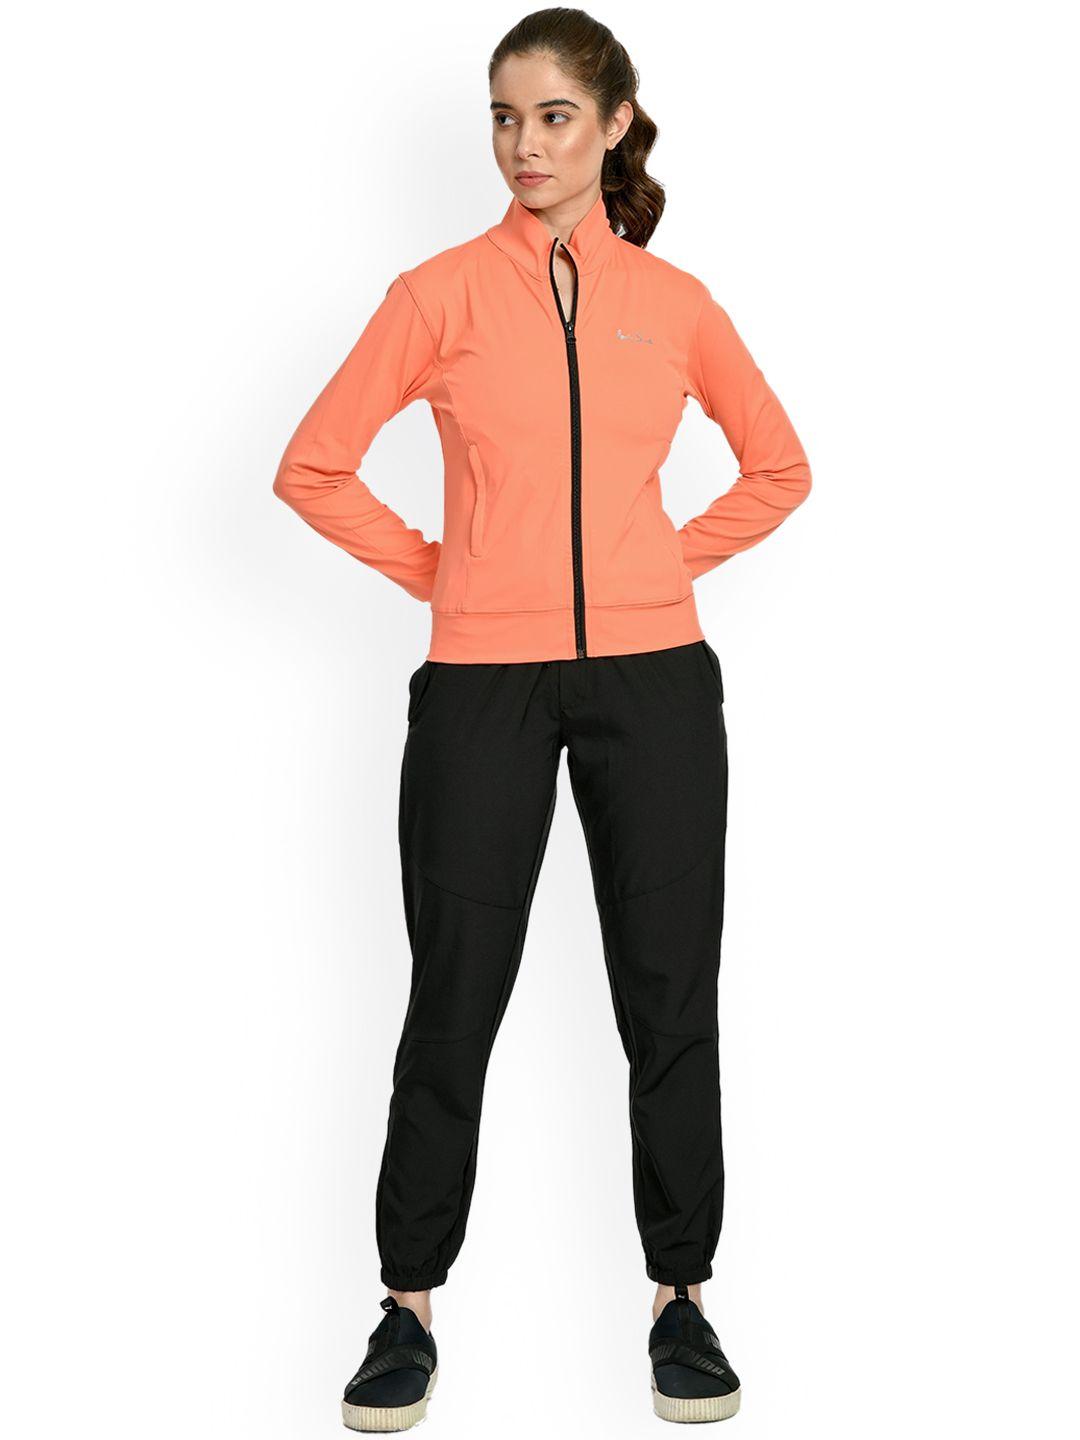 body smith mock collar long sleeves dry fit training or gym sporty jacket